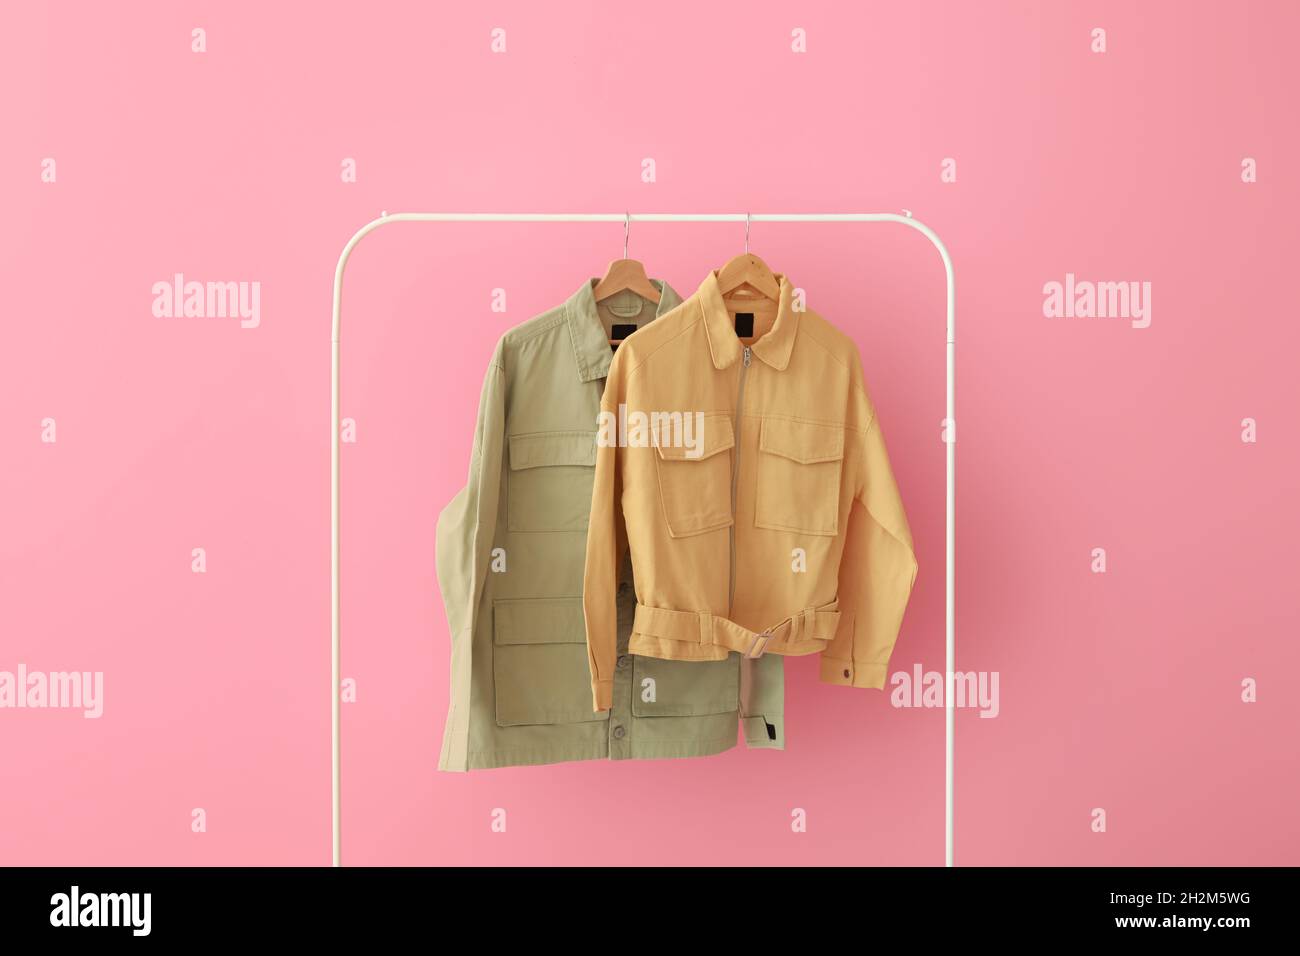 Rack with green and yellow jackets near pink wall Stock Photo